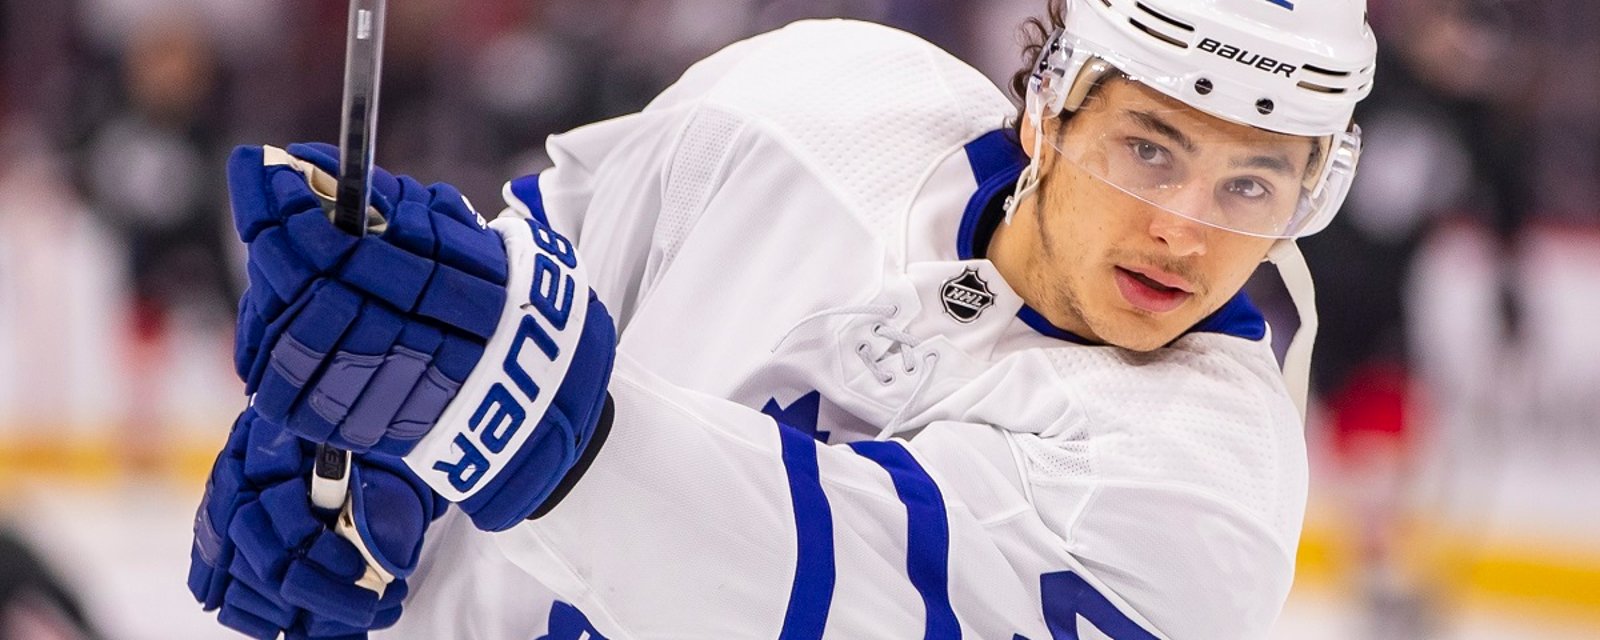 Trevor Moore out once again, Leafs forced to make emergency call up.